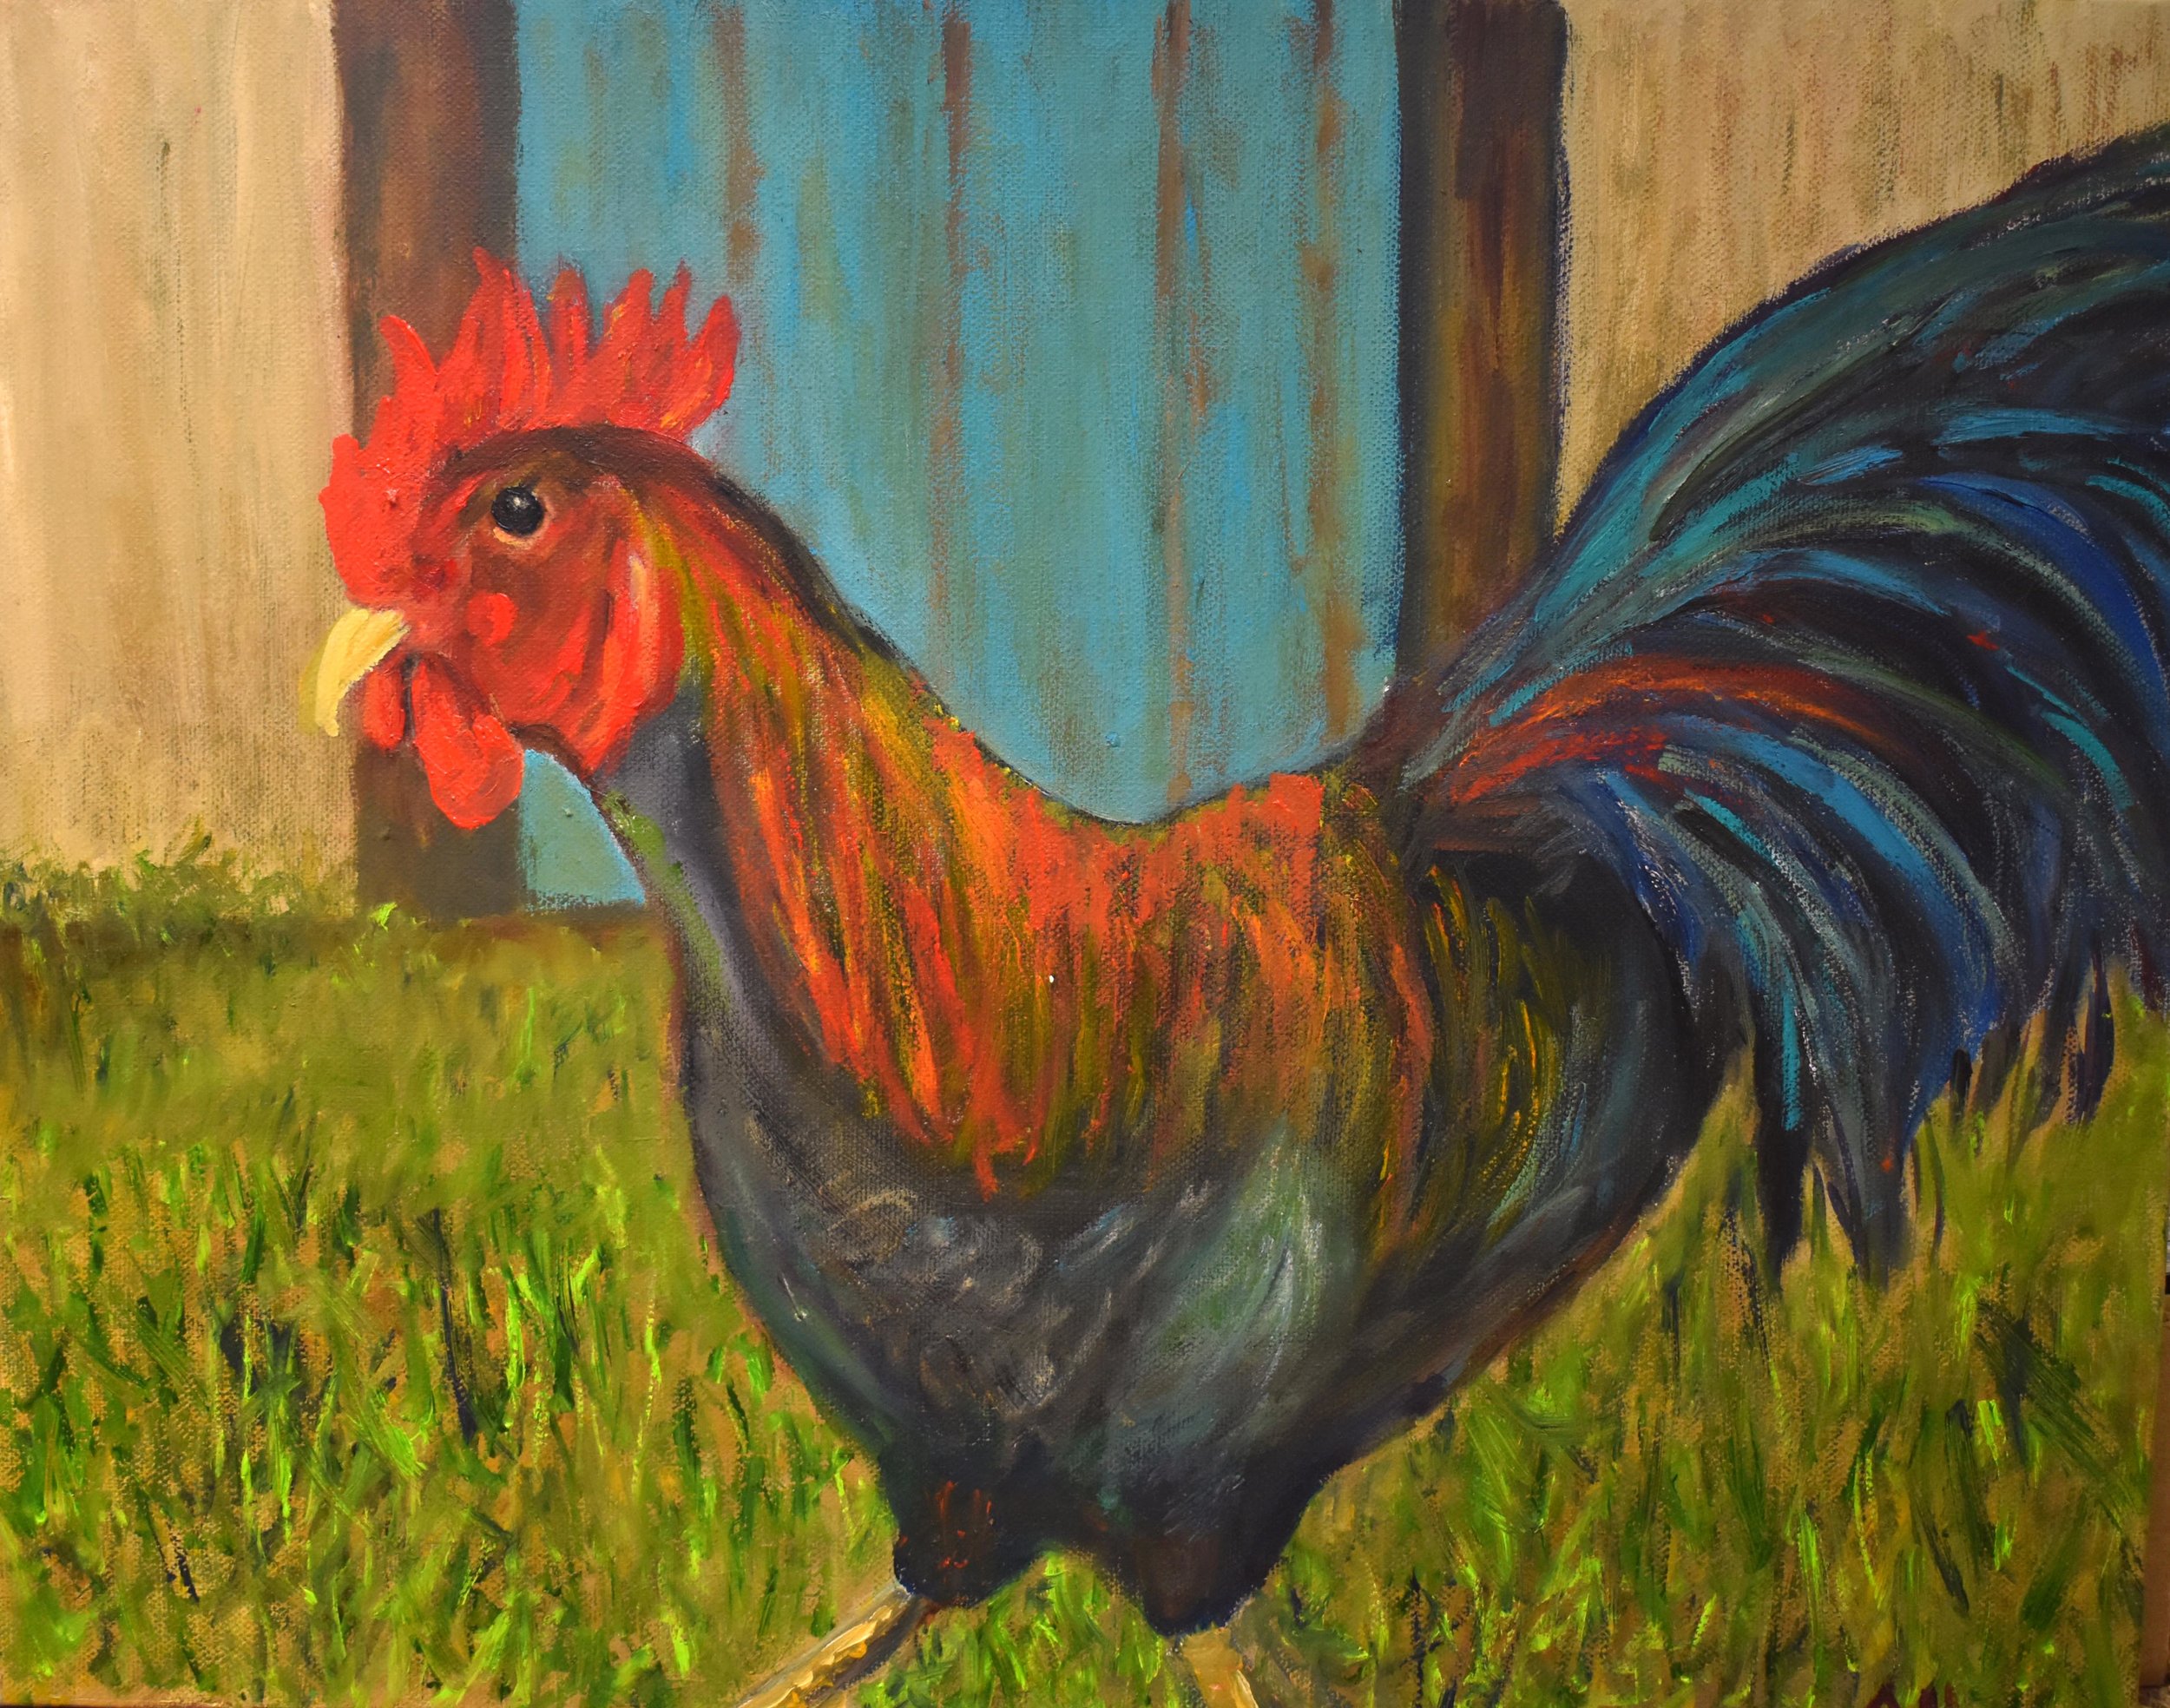 Ralph the Bajan Rooster